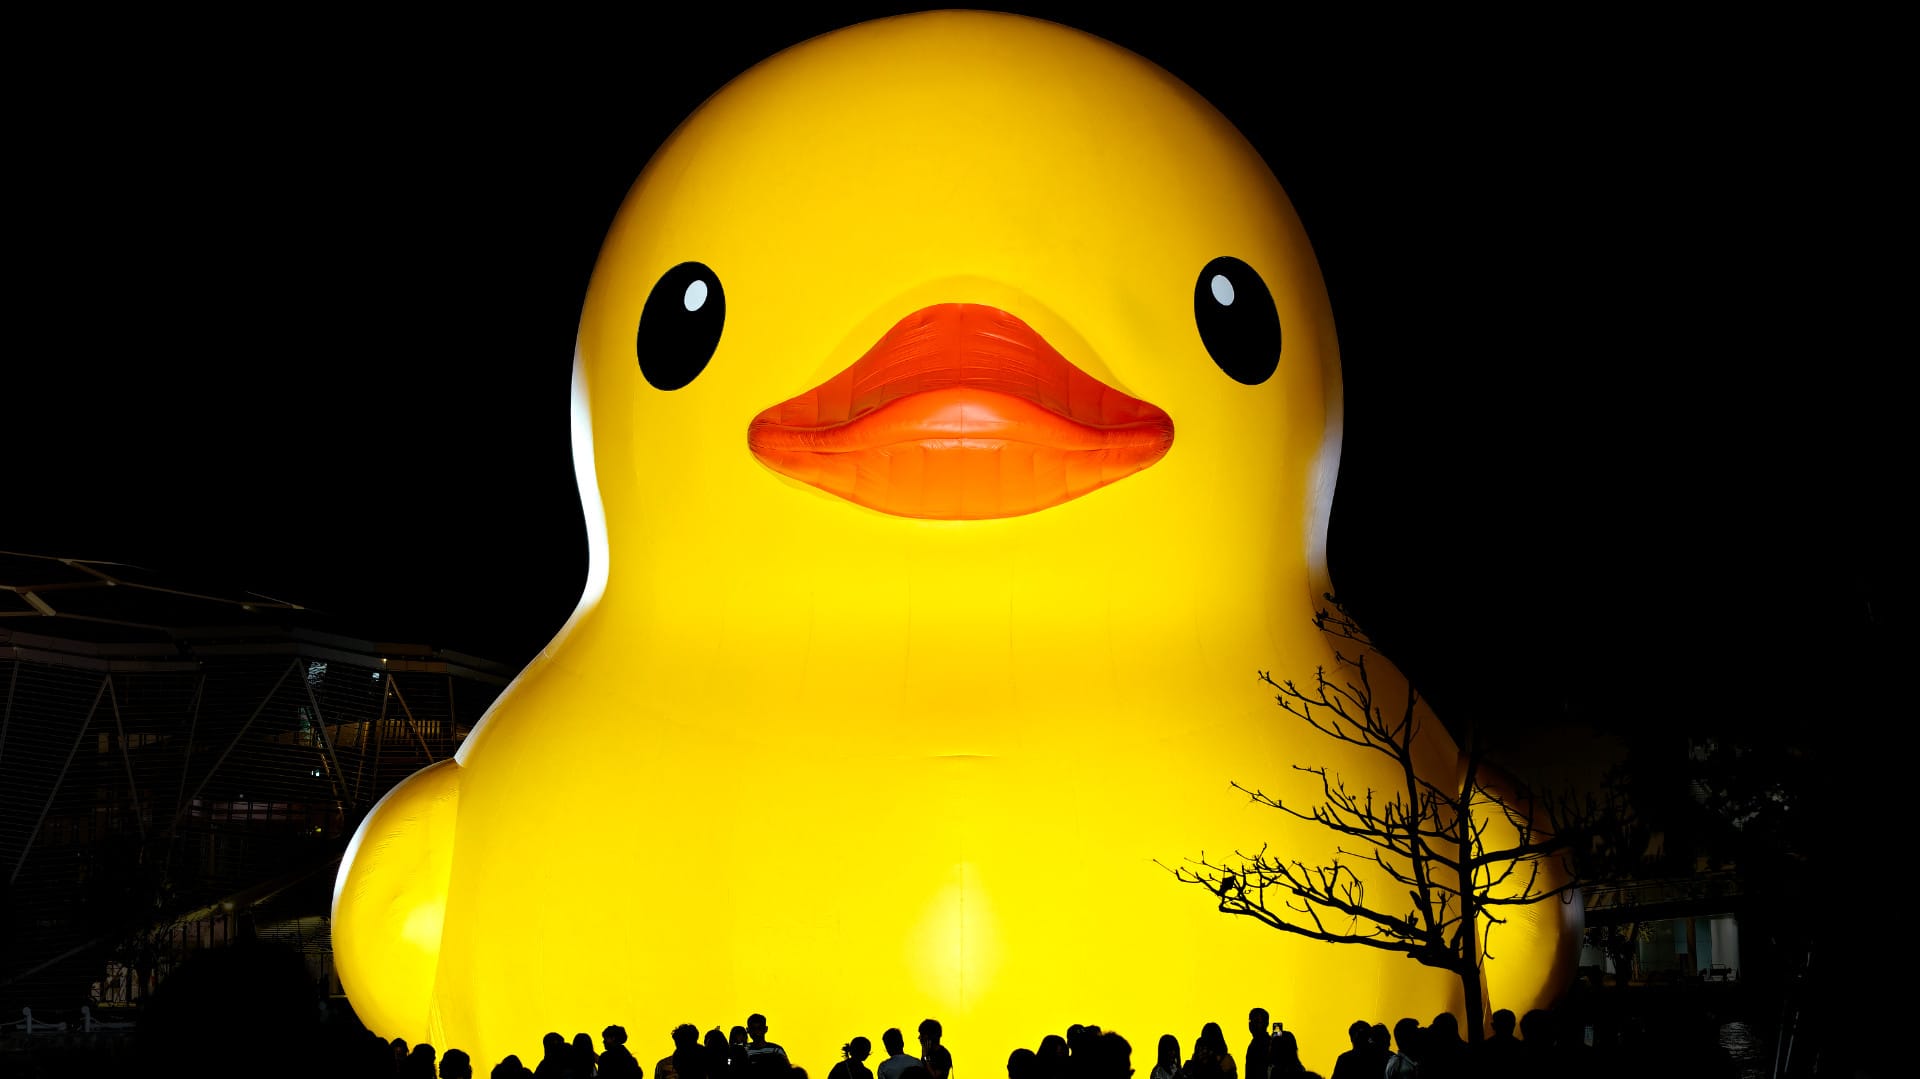 Frontal view of a large rubber duck moored on Kaohsiung Harbor at night, with hundreds of people silhouetted in the foreground. The duck towers over them, may stories tall.